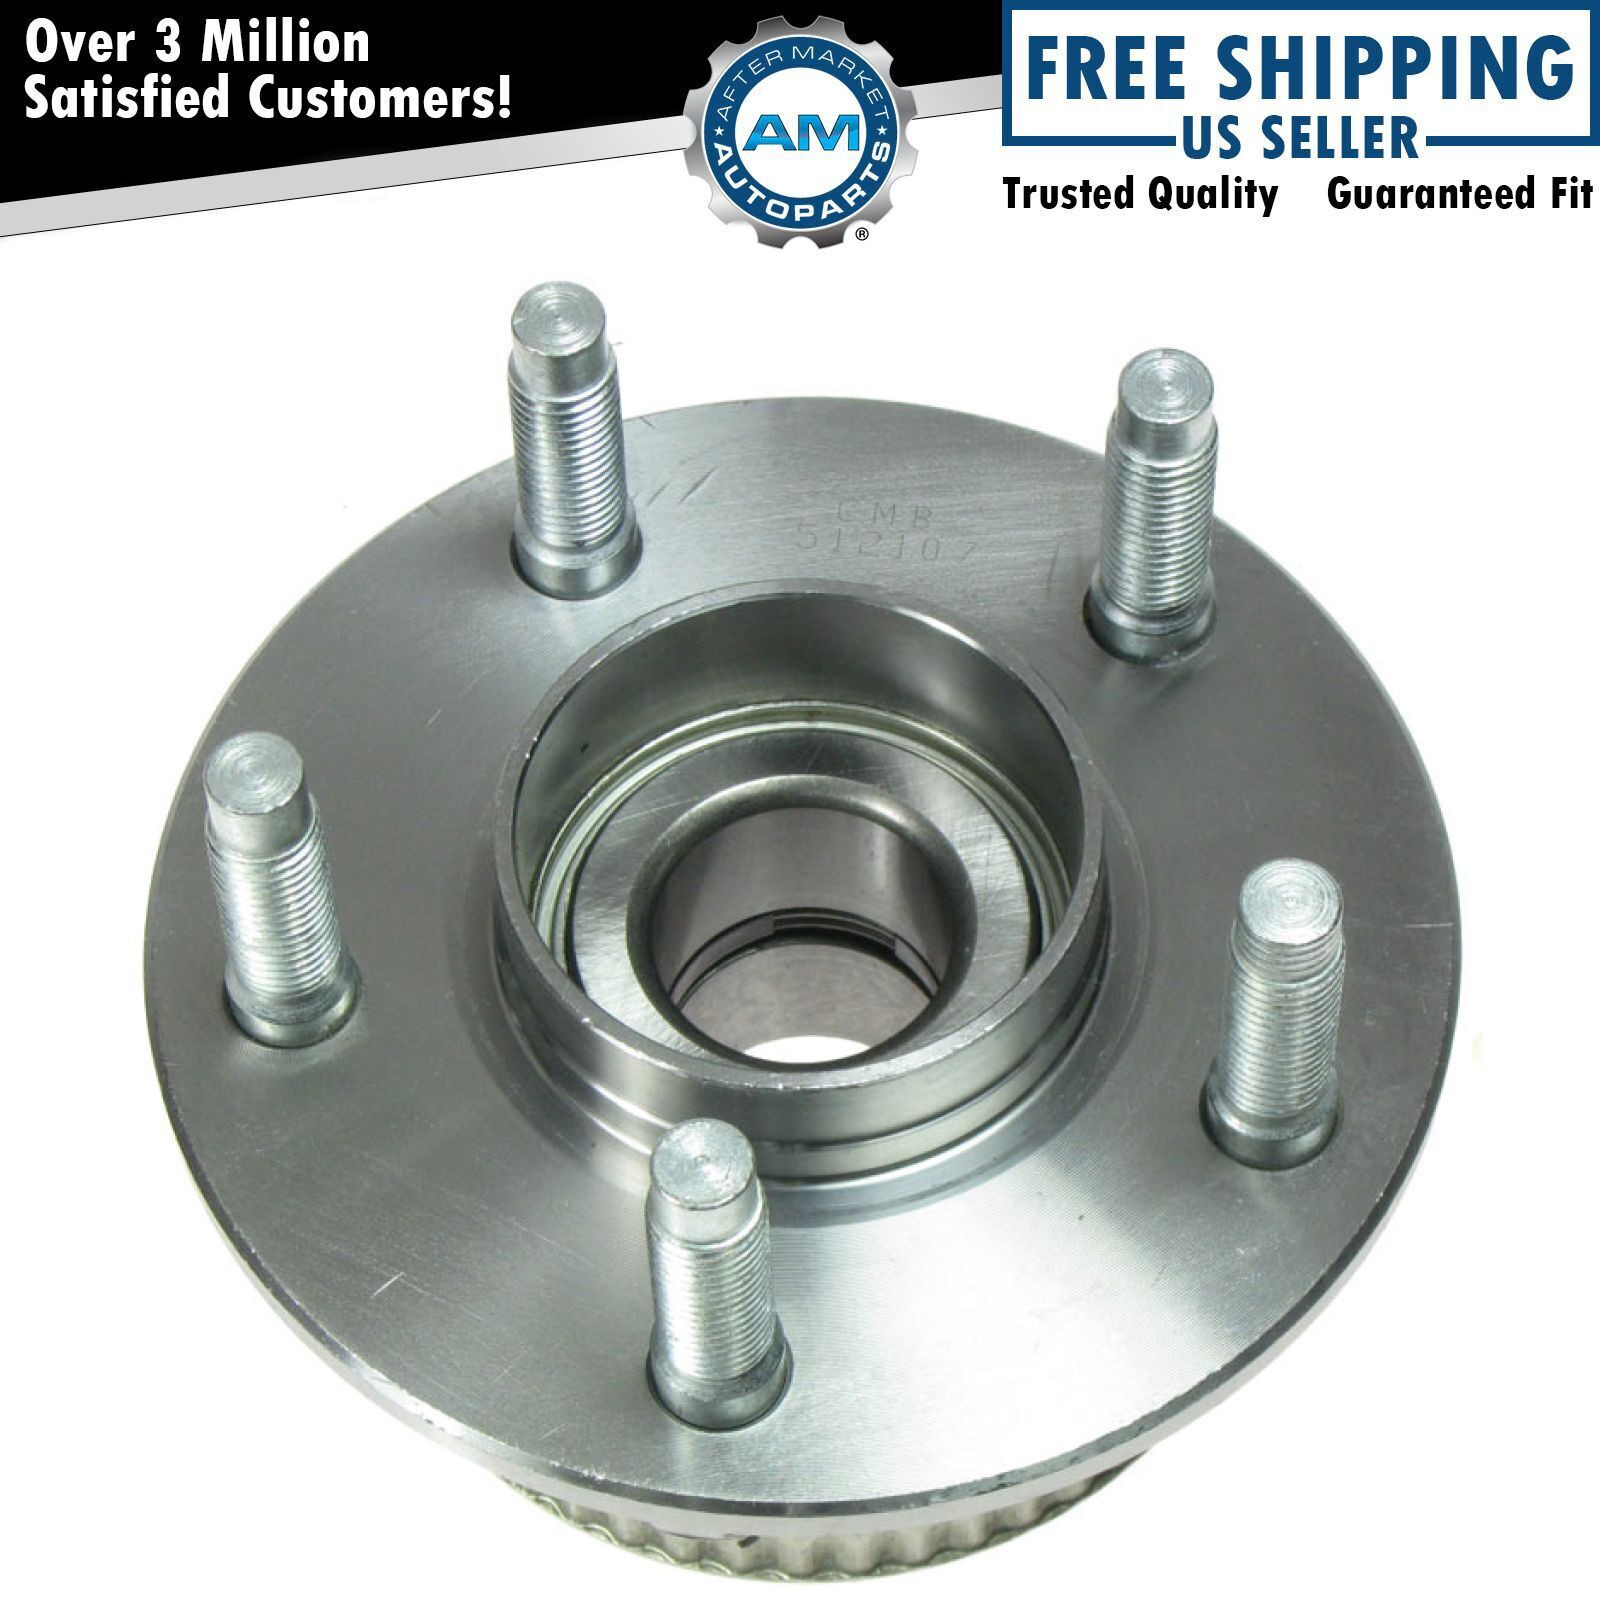 Rear Wheel Hub & Bearing Assembly for Ford Taurus Sable Continental w/ ABS